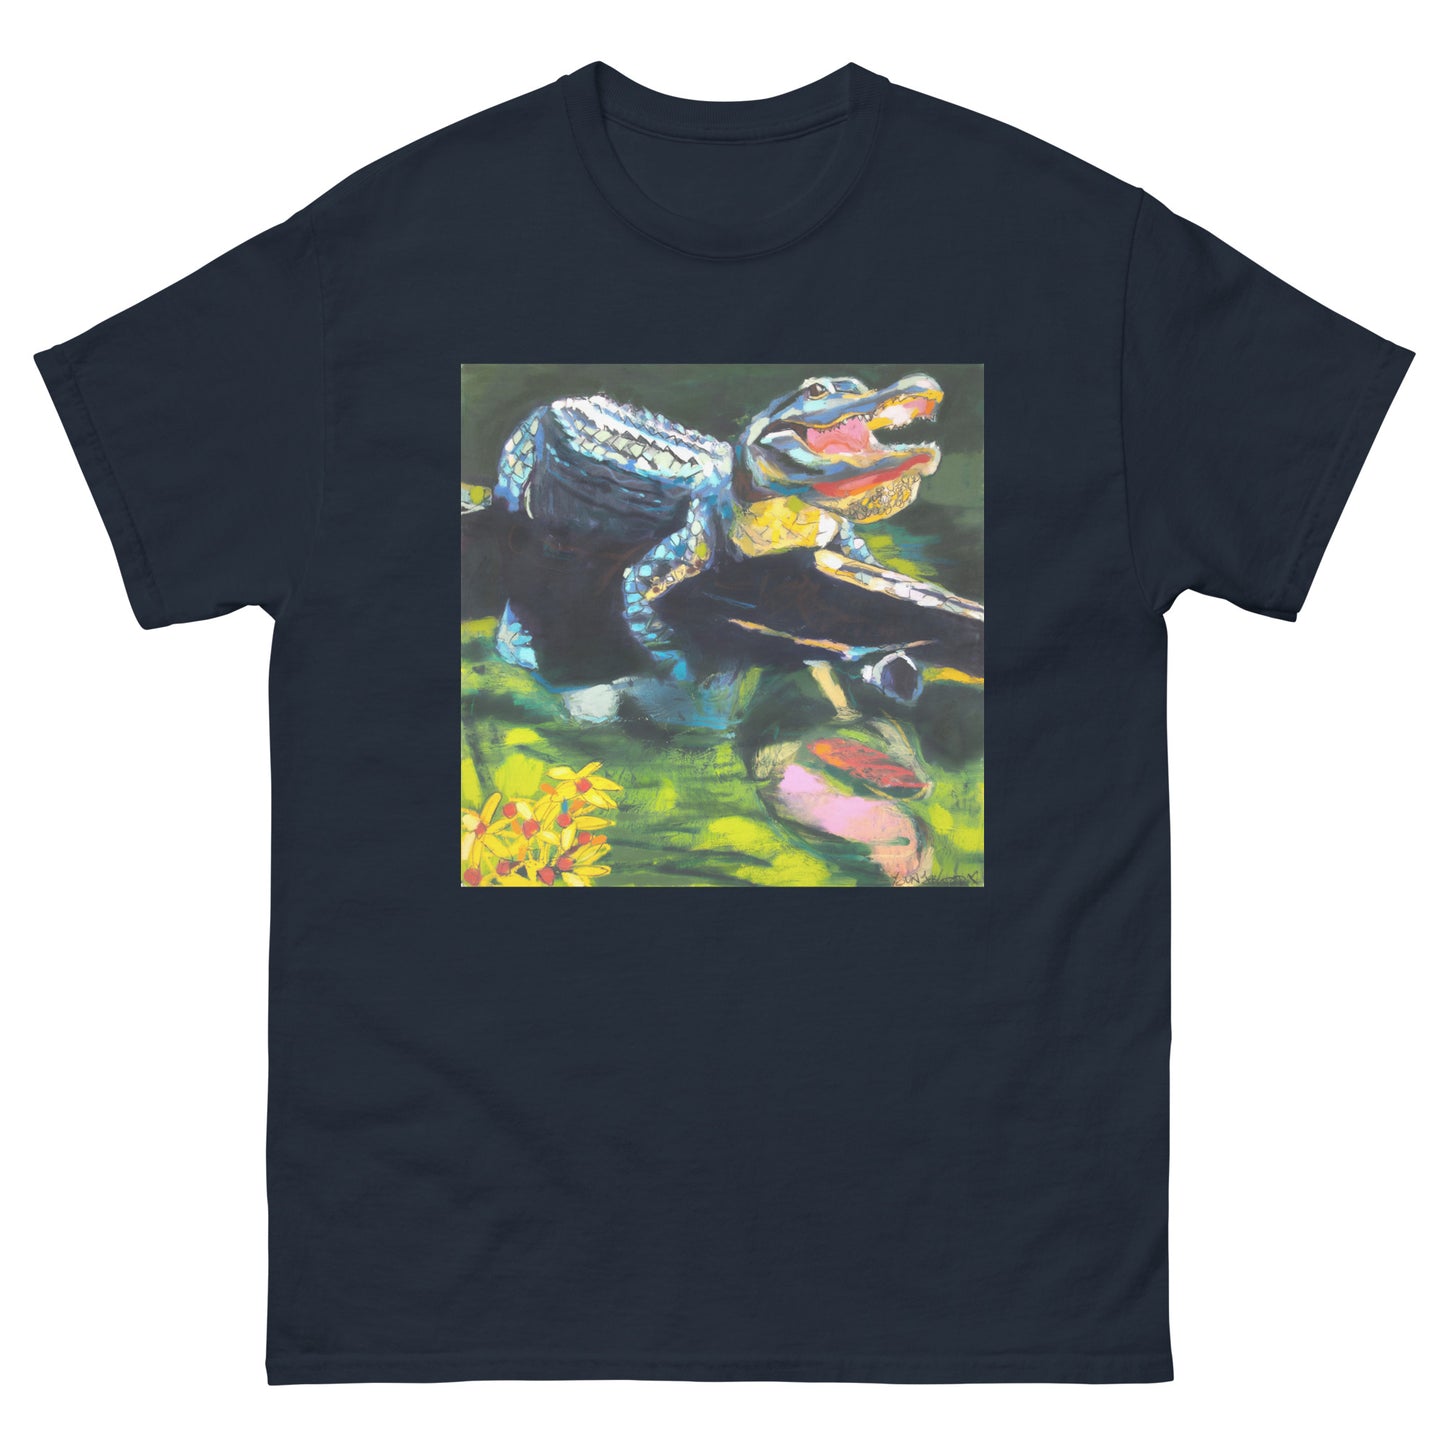 Square Gator with Wildflowers Unisex classic tee